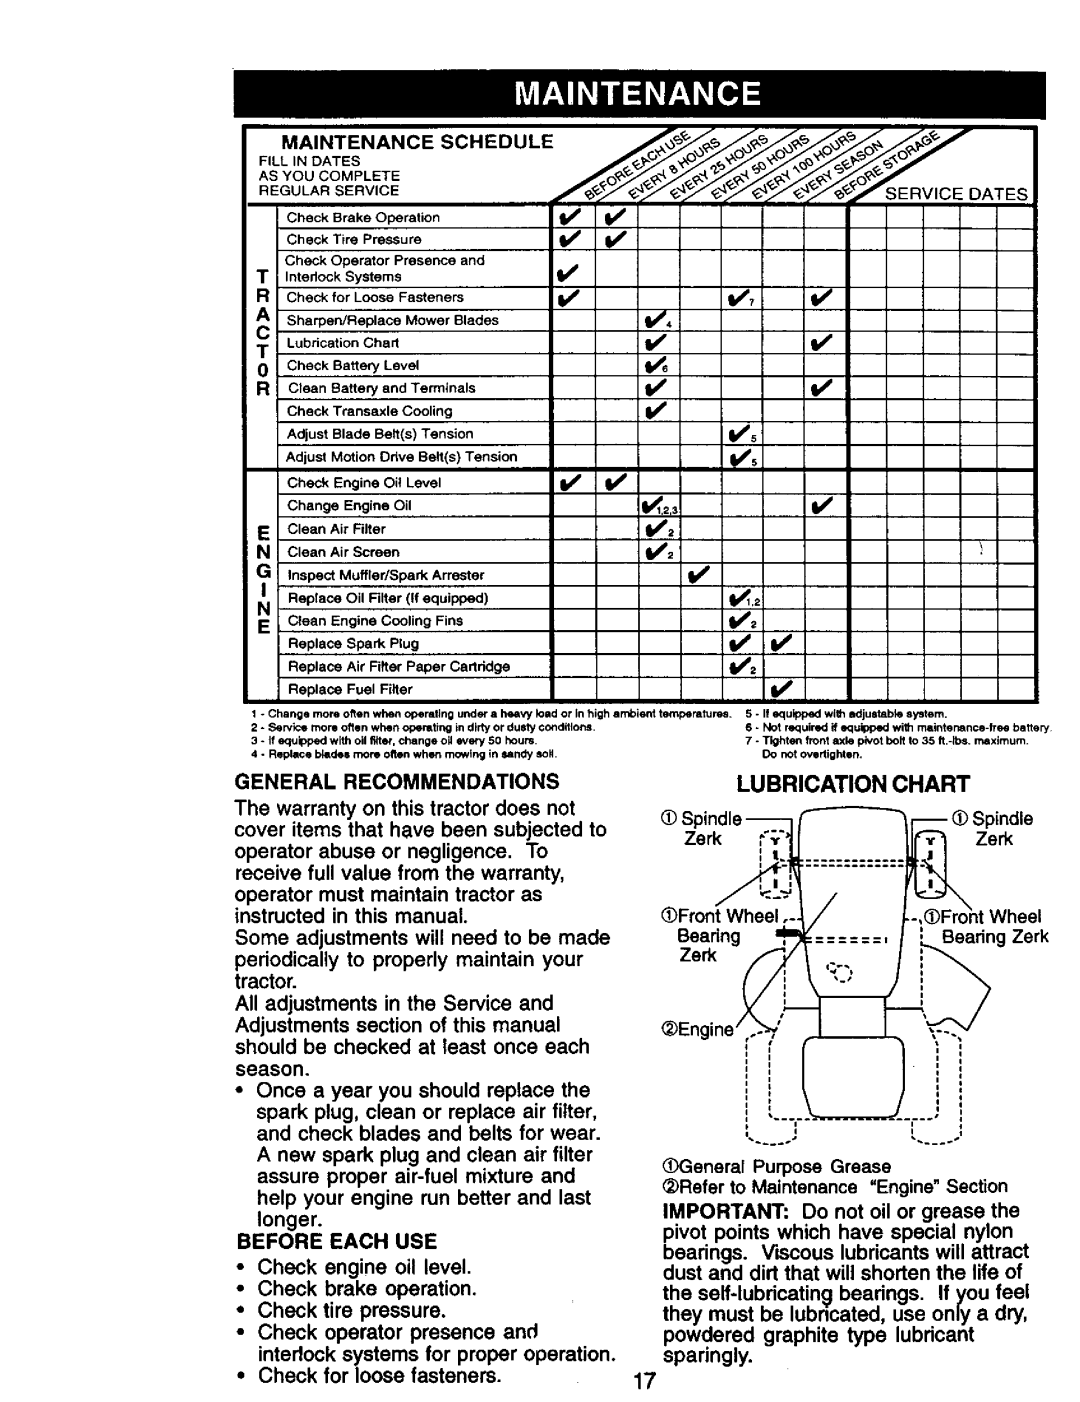 Craftsman 917.271142 manual Lubrication Chart, General Recommendations, AsYOUCOMPLETEFILL IN DATES 